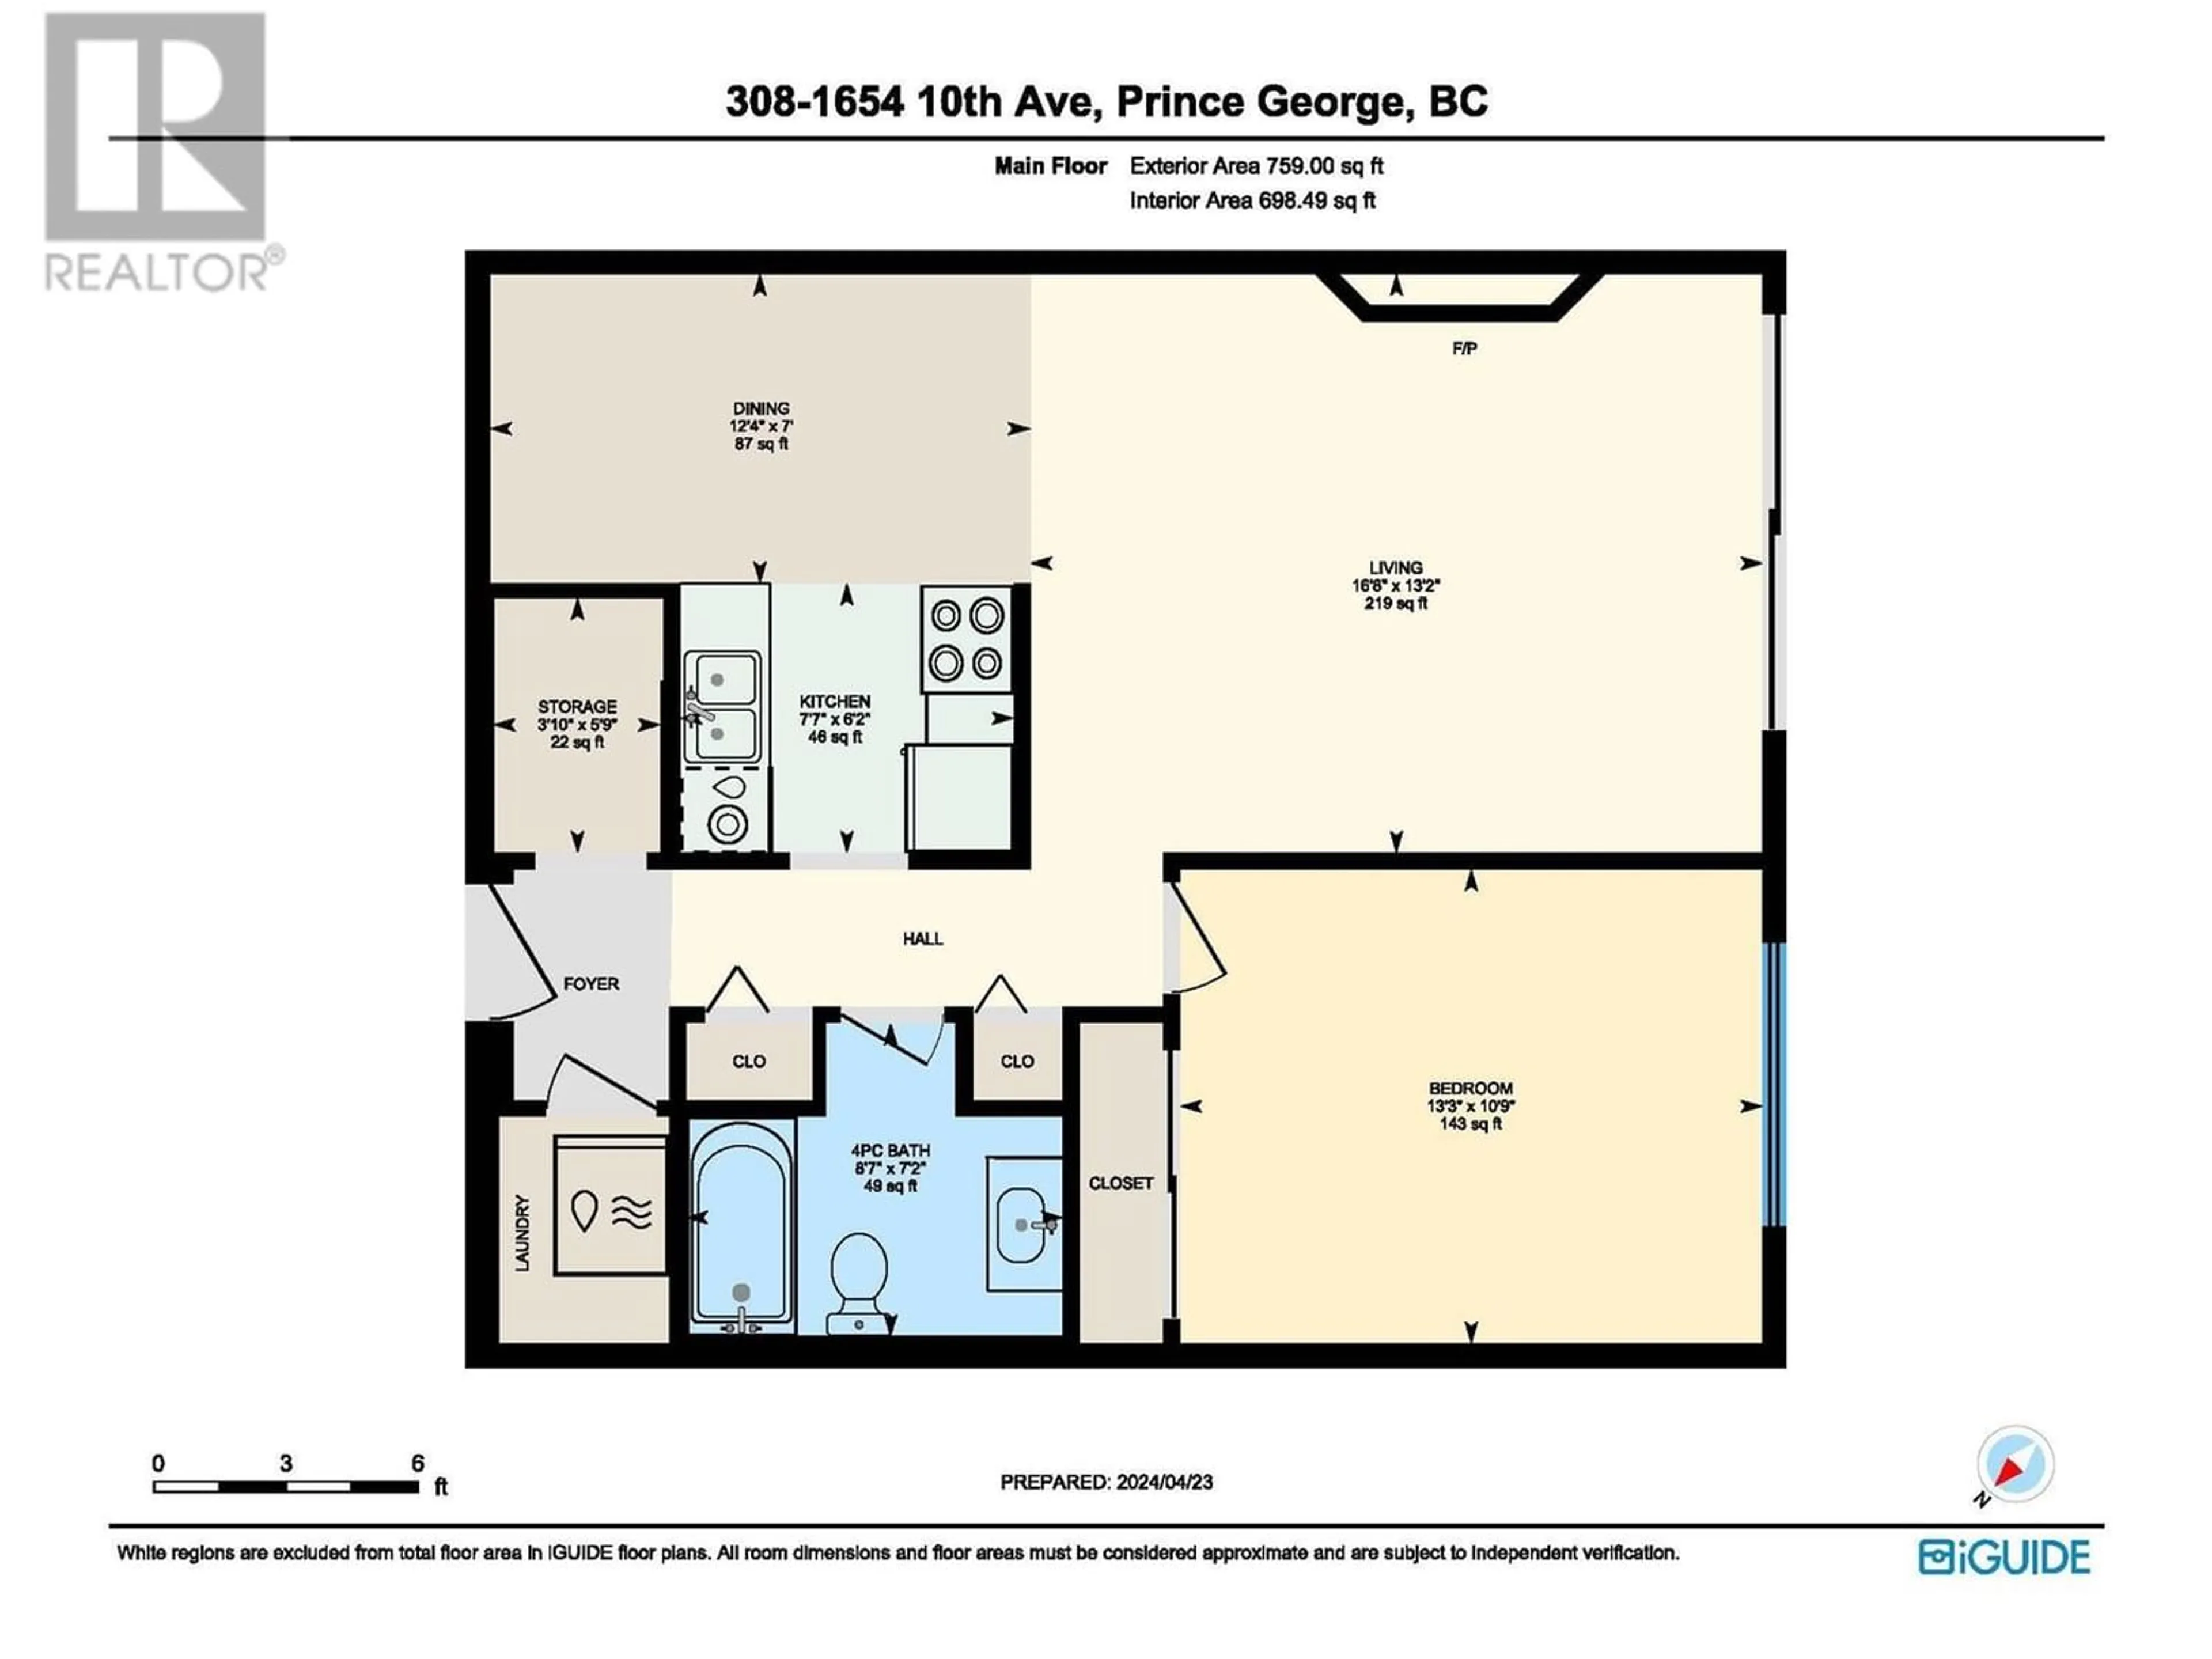 Floor plan for 308 1654 10TH AVENUE, Prince George British Columbia V2L3S4